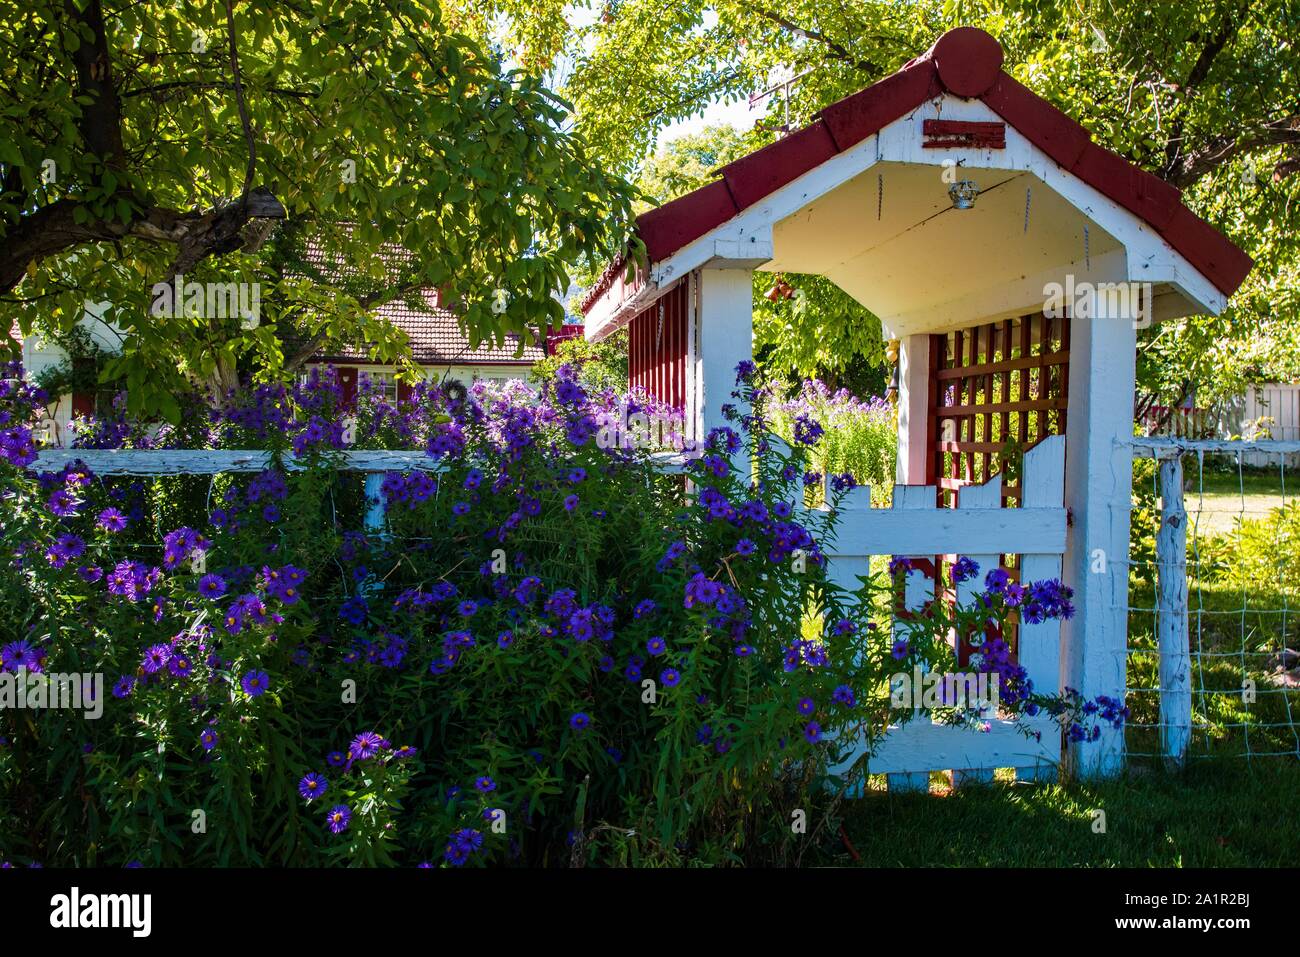 Old fashioned Asters and colorful garden gate entrance to rural garden. Stock Photo